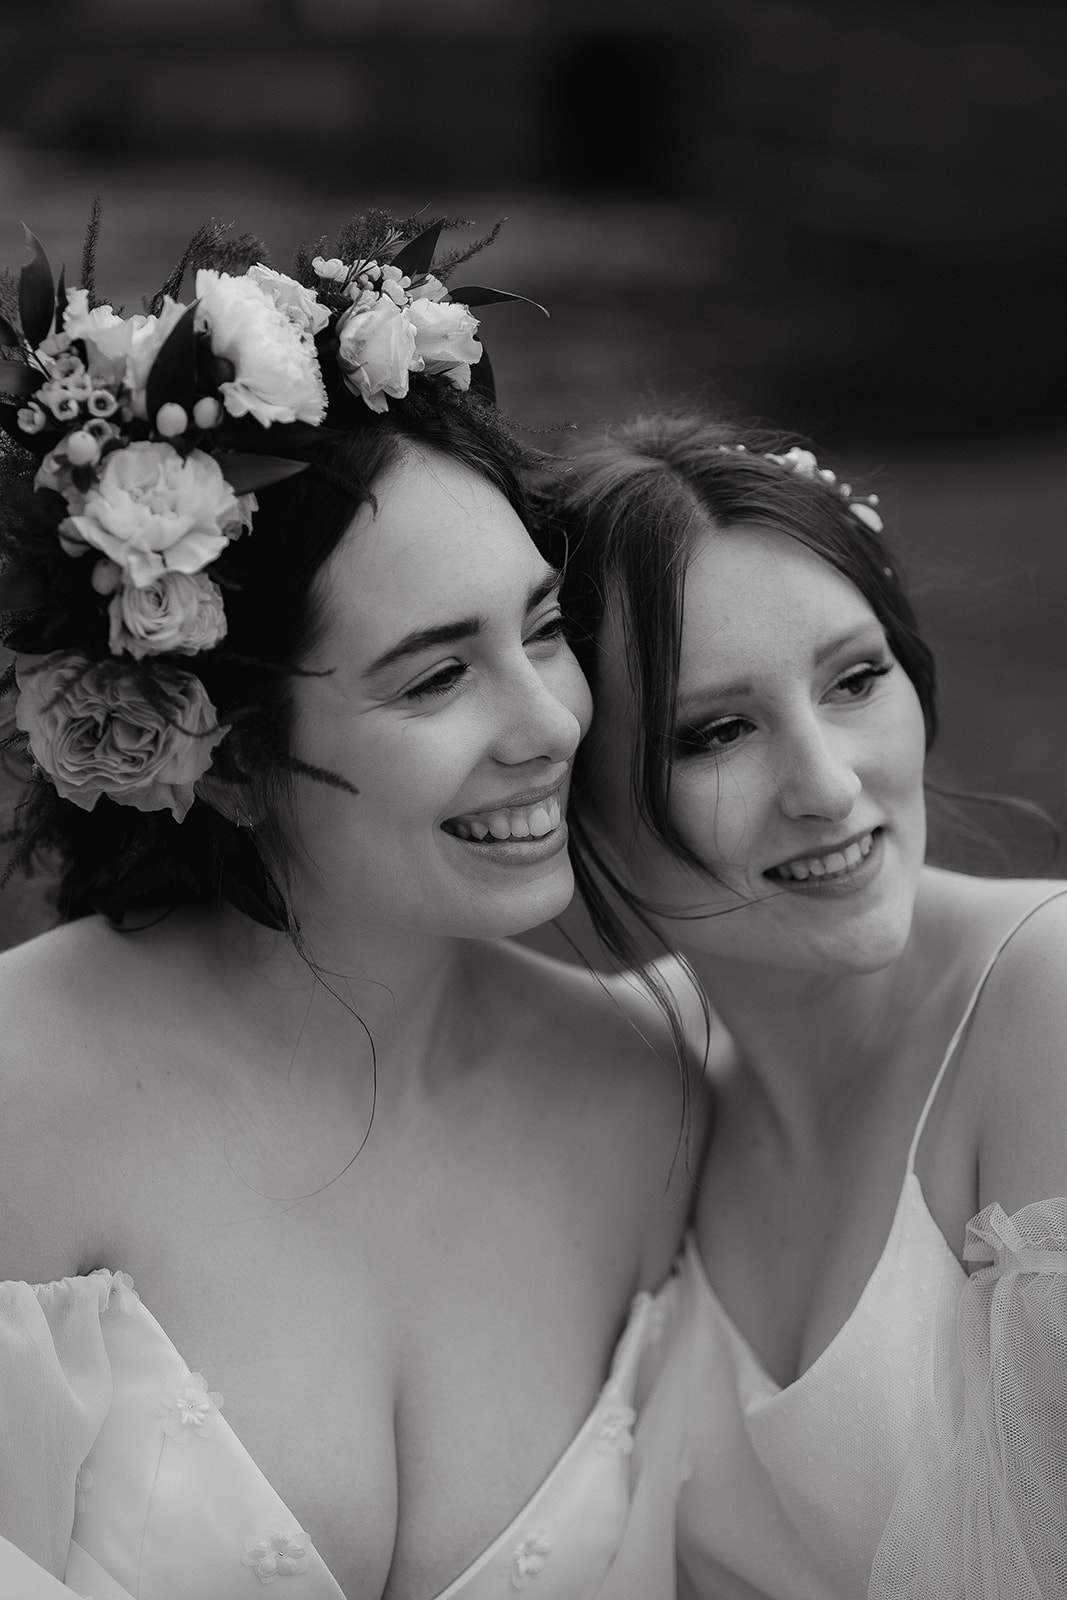 Black and white photo of two brides looking into the distance together